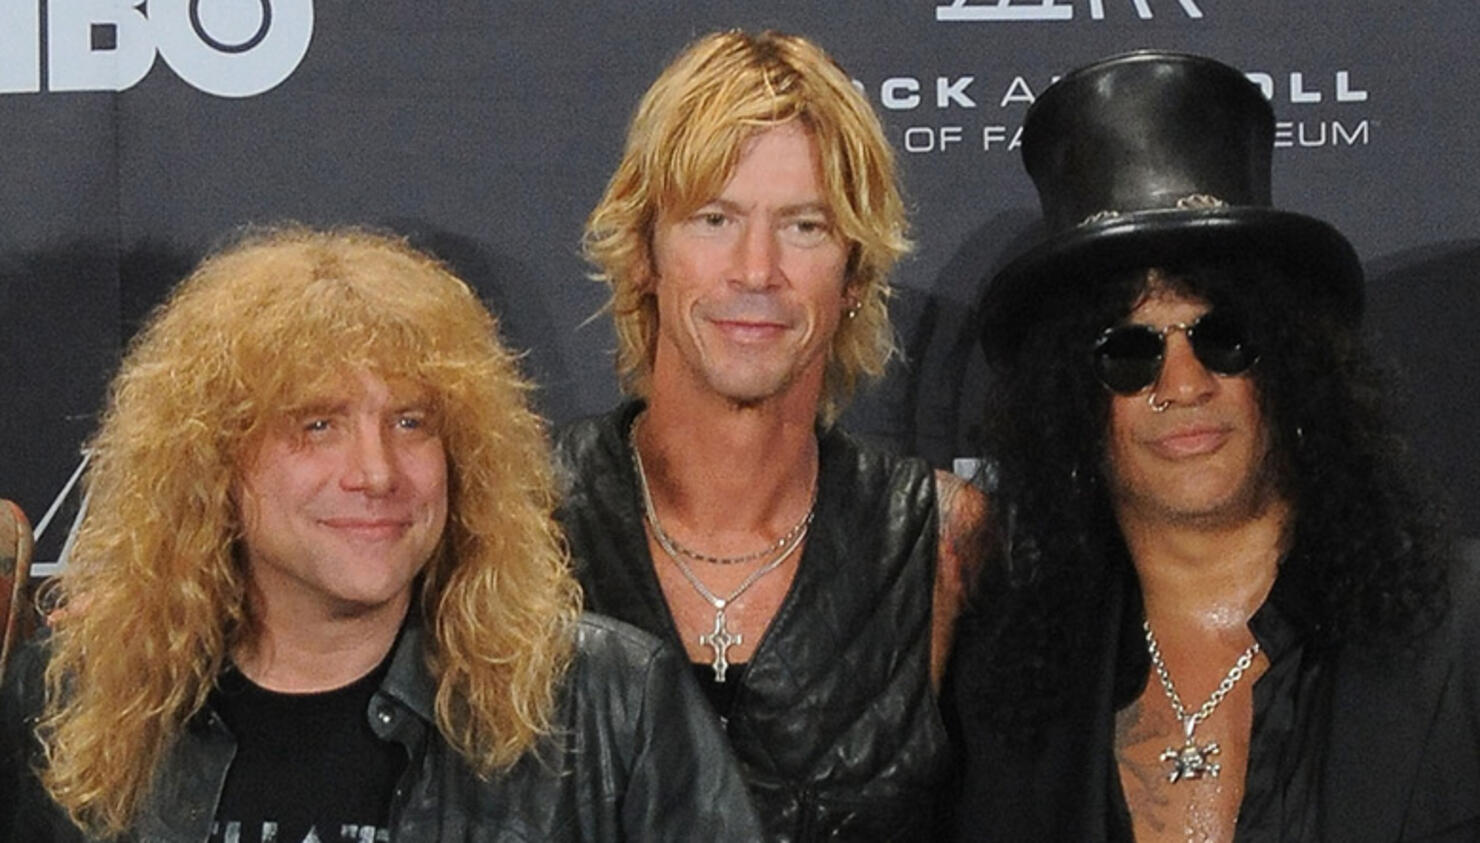 Steven Adler Says Guns N' Roses Changed 'Completely' Without Him